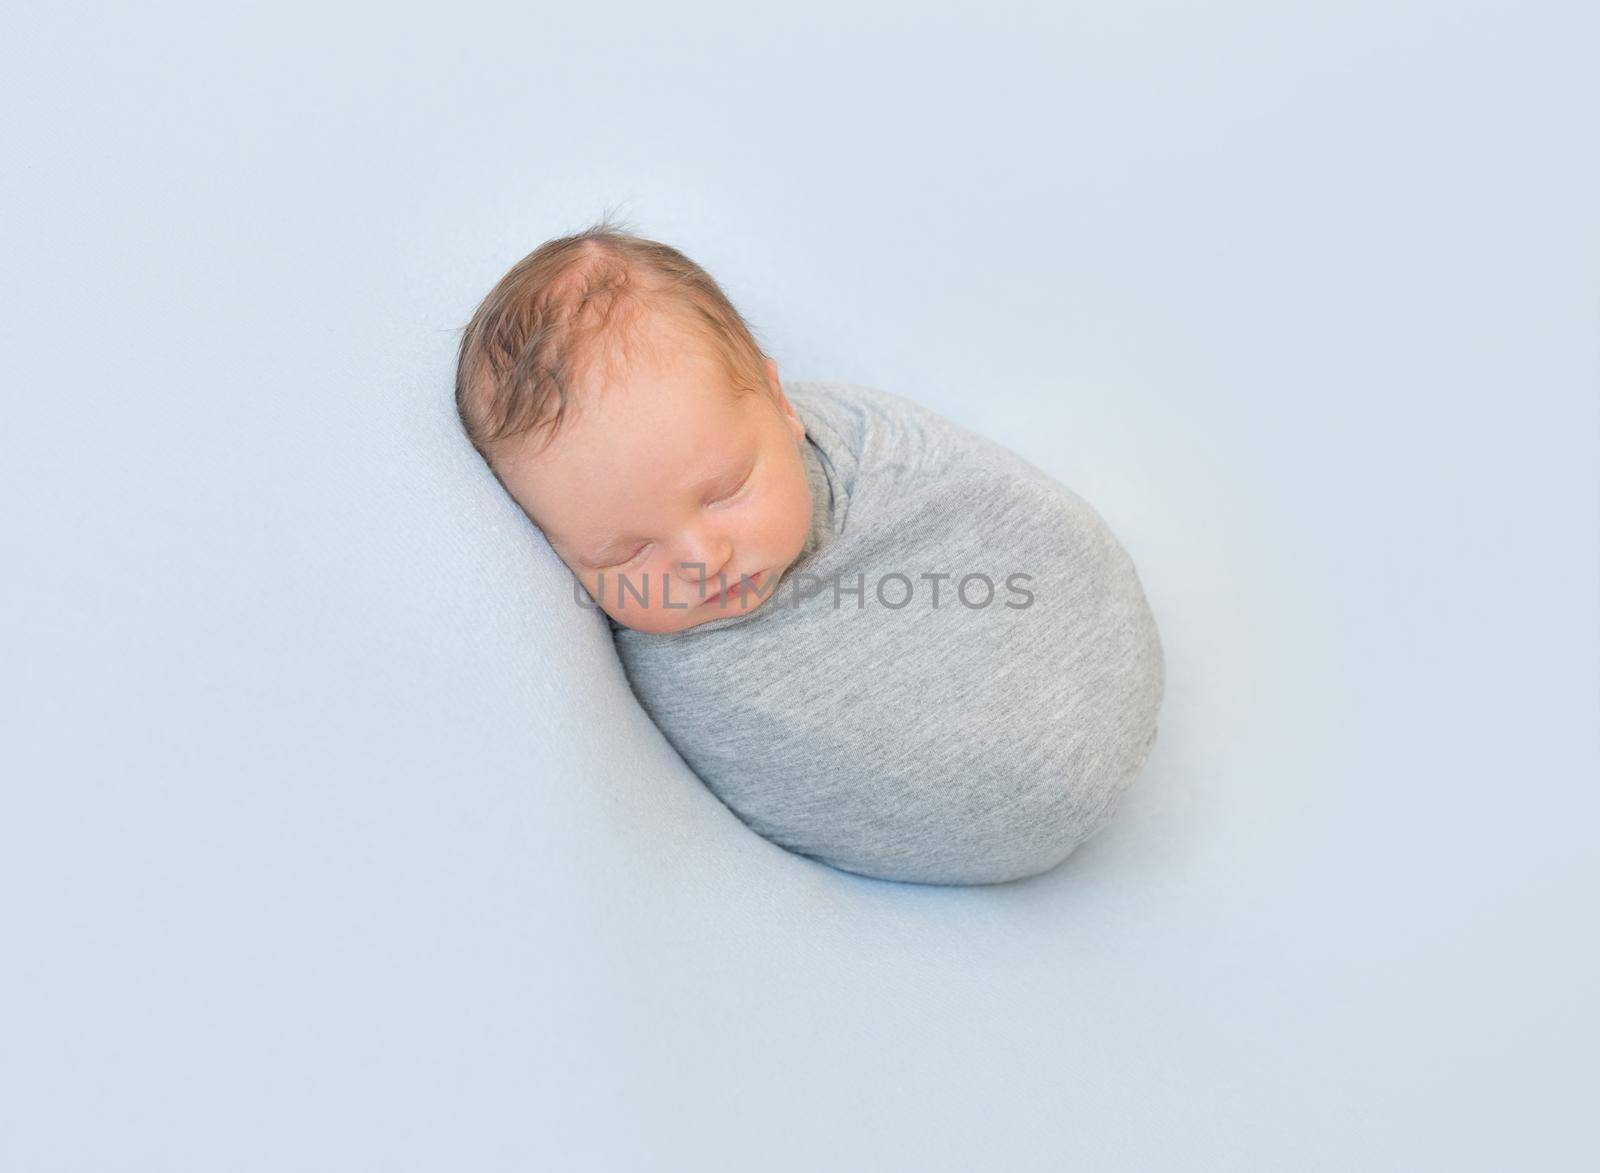 Tiny hairy infant sleeping curled up, wrapped in gray small blanket, on side, blue background